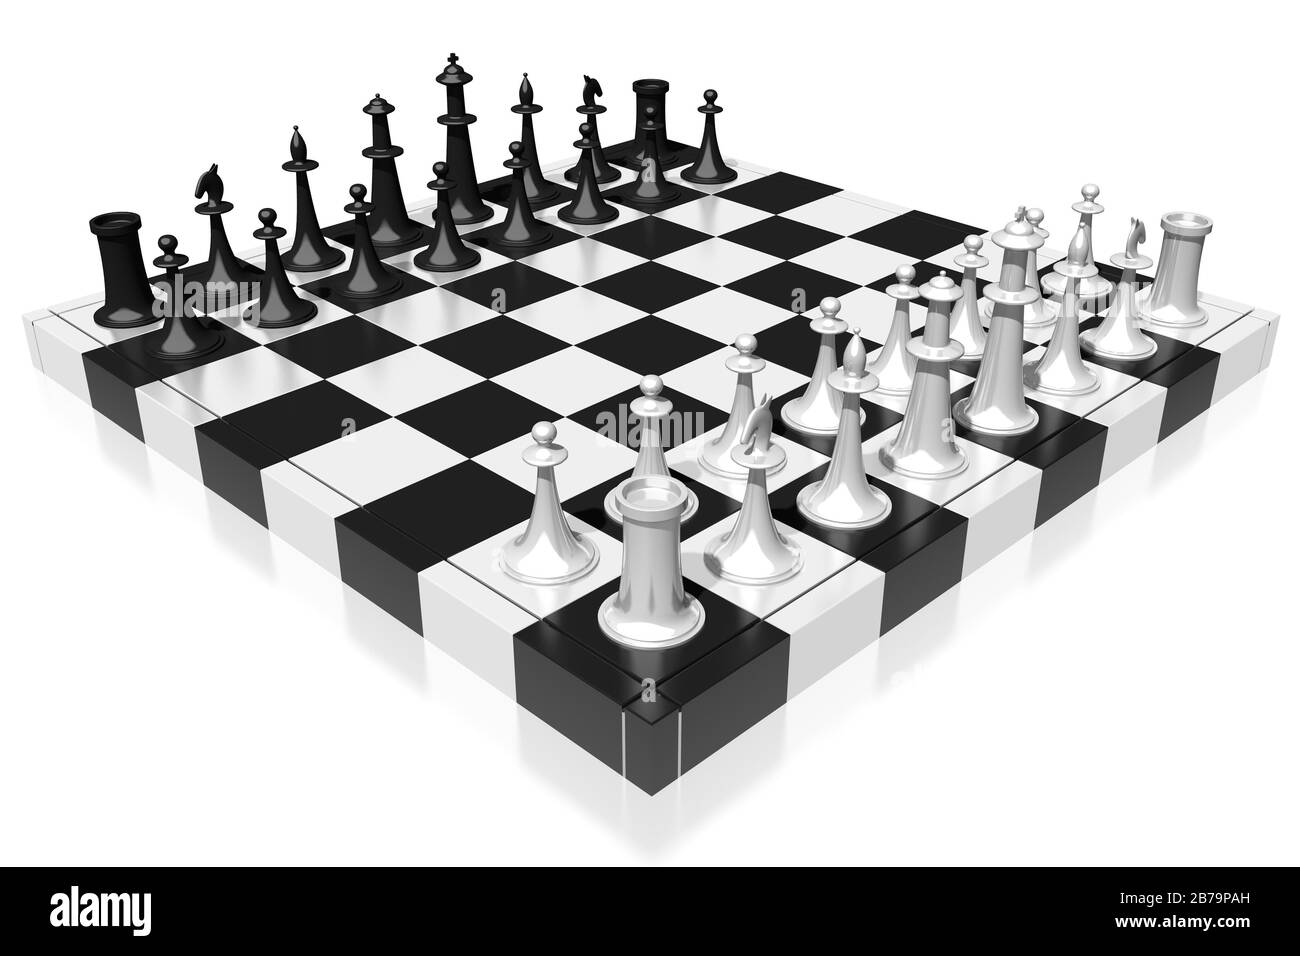 Chess Pieces Isolated - PNG Stock Image - Illustration of chess